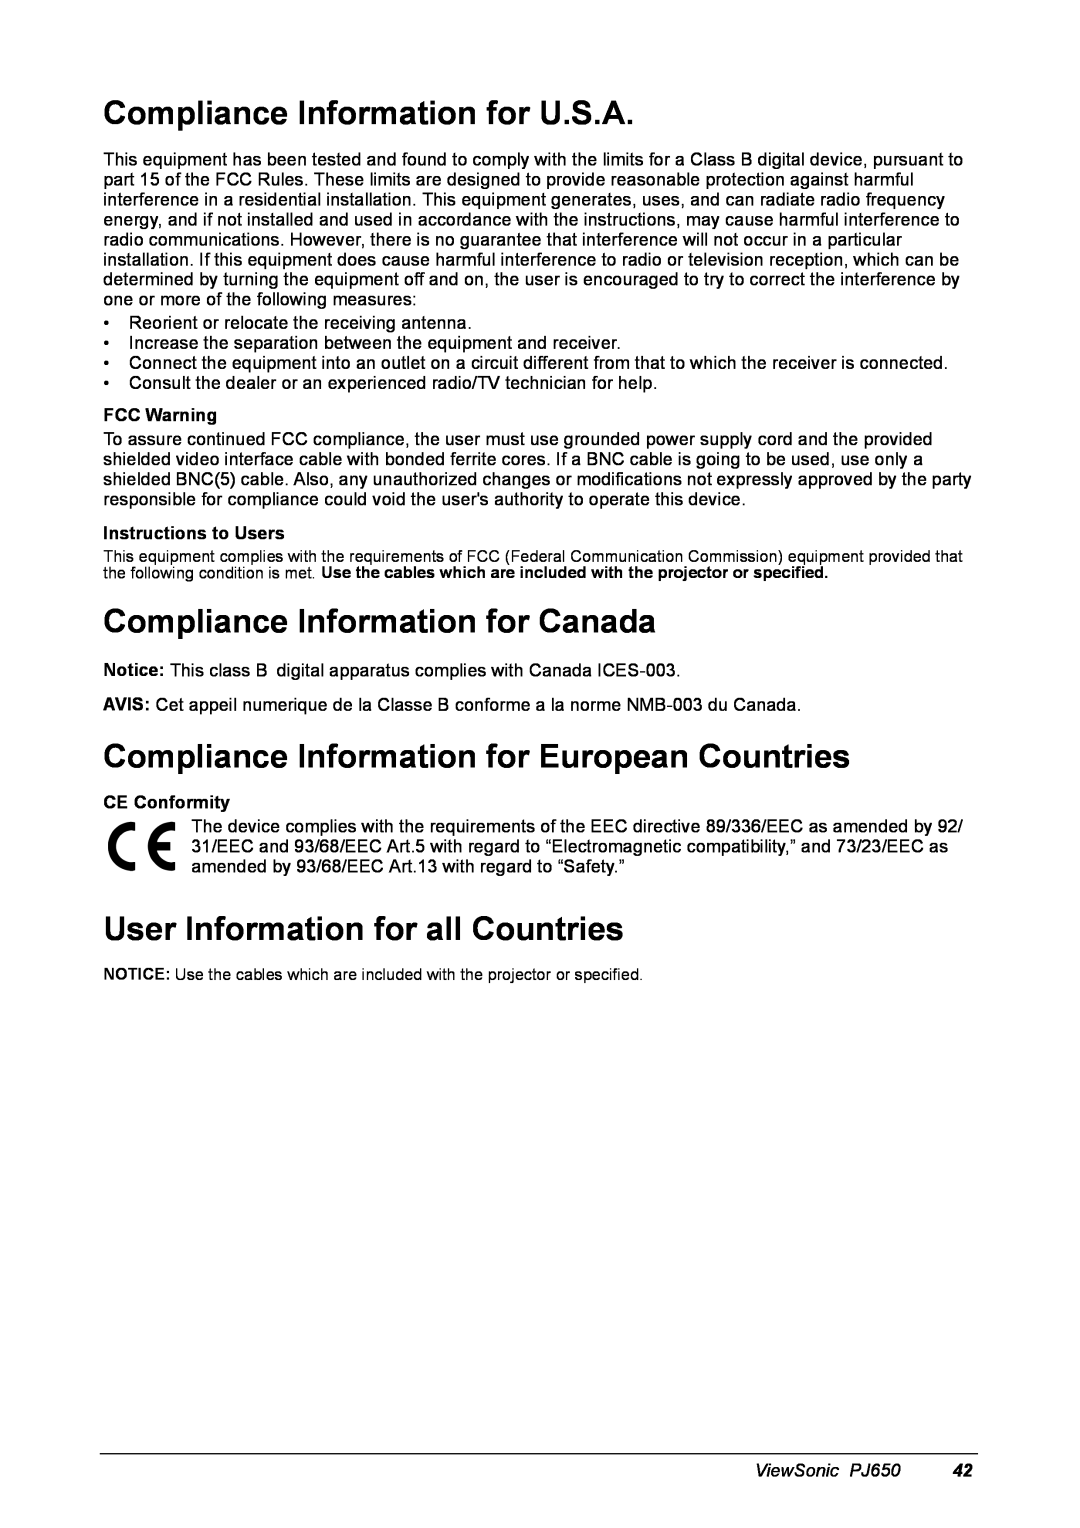 ViewSonic PJ650 Compliance Information for U.S.A, Compliance Information for Canada, User Information for all Countries 